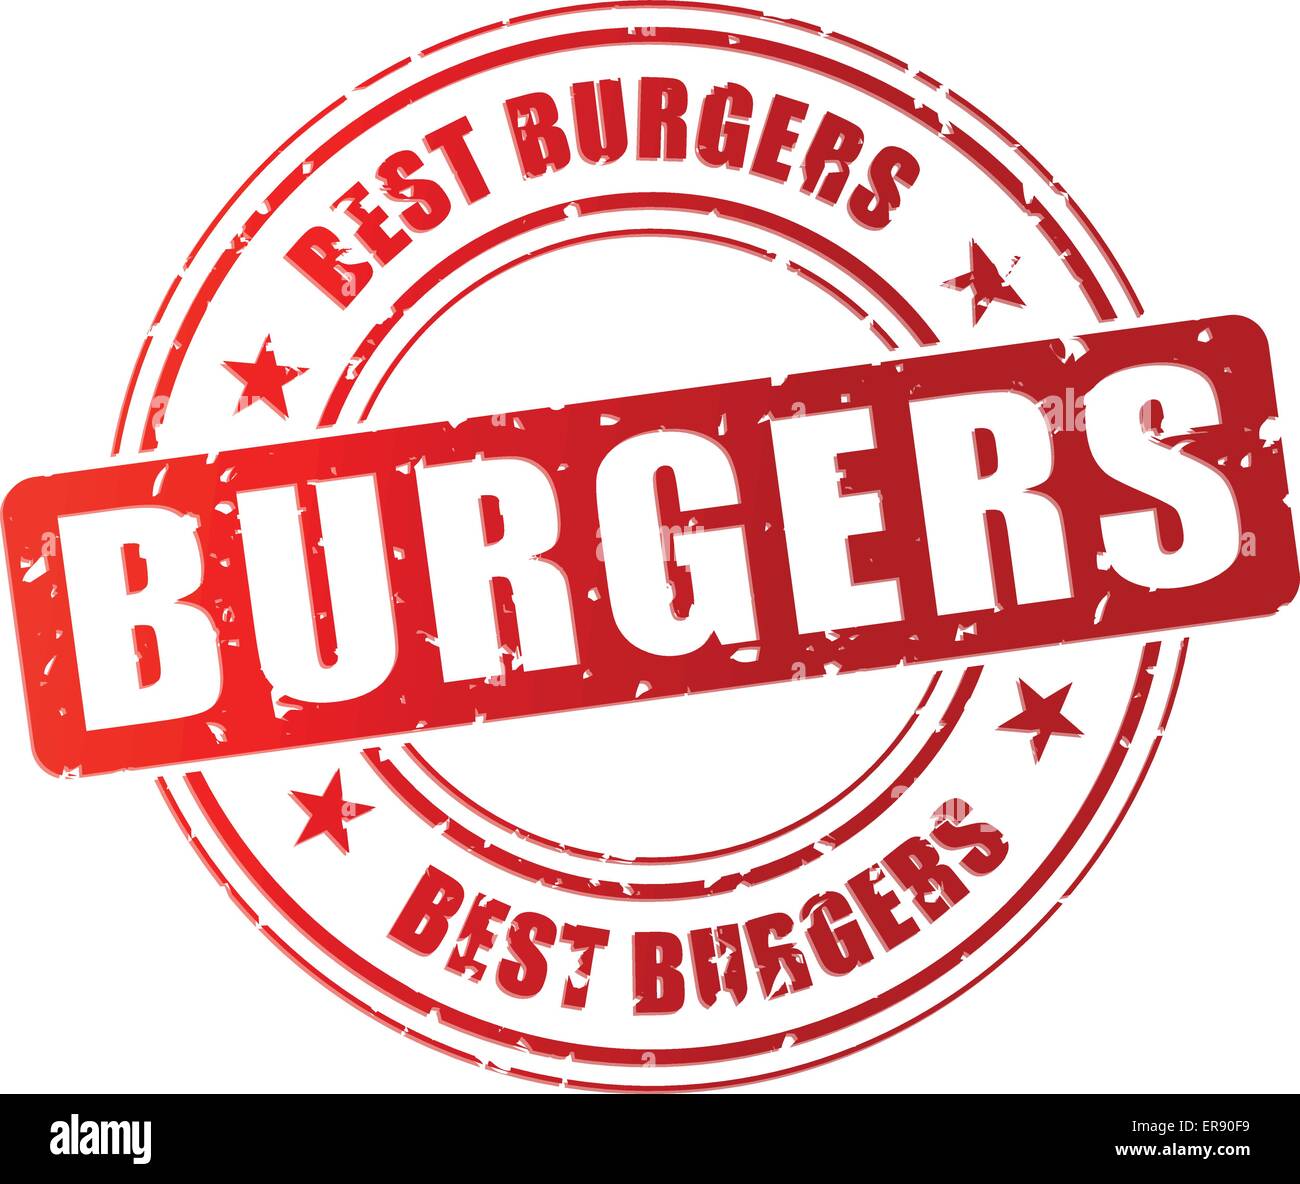 Vector illustration of best burgers stamp icon Stock Vector